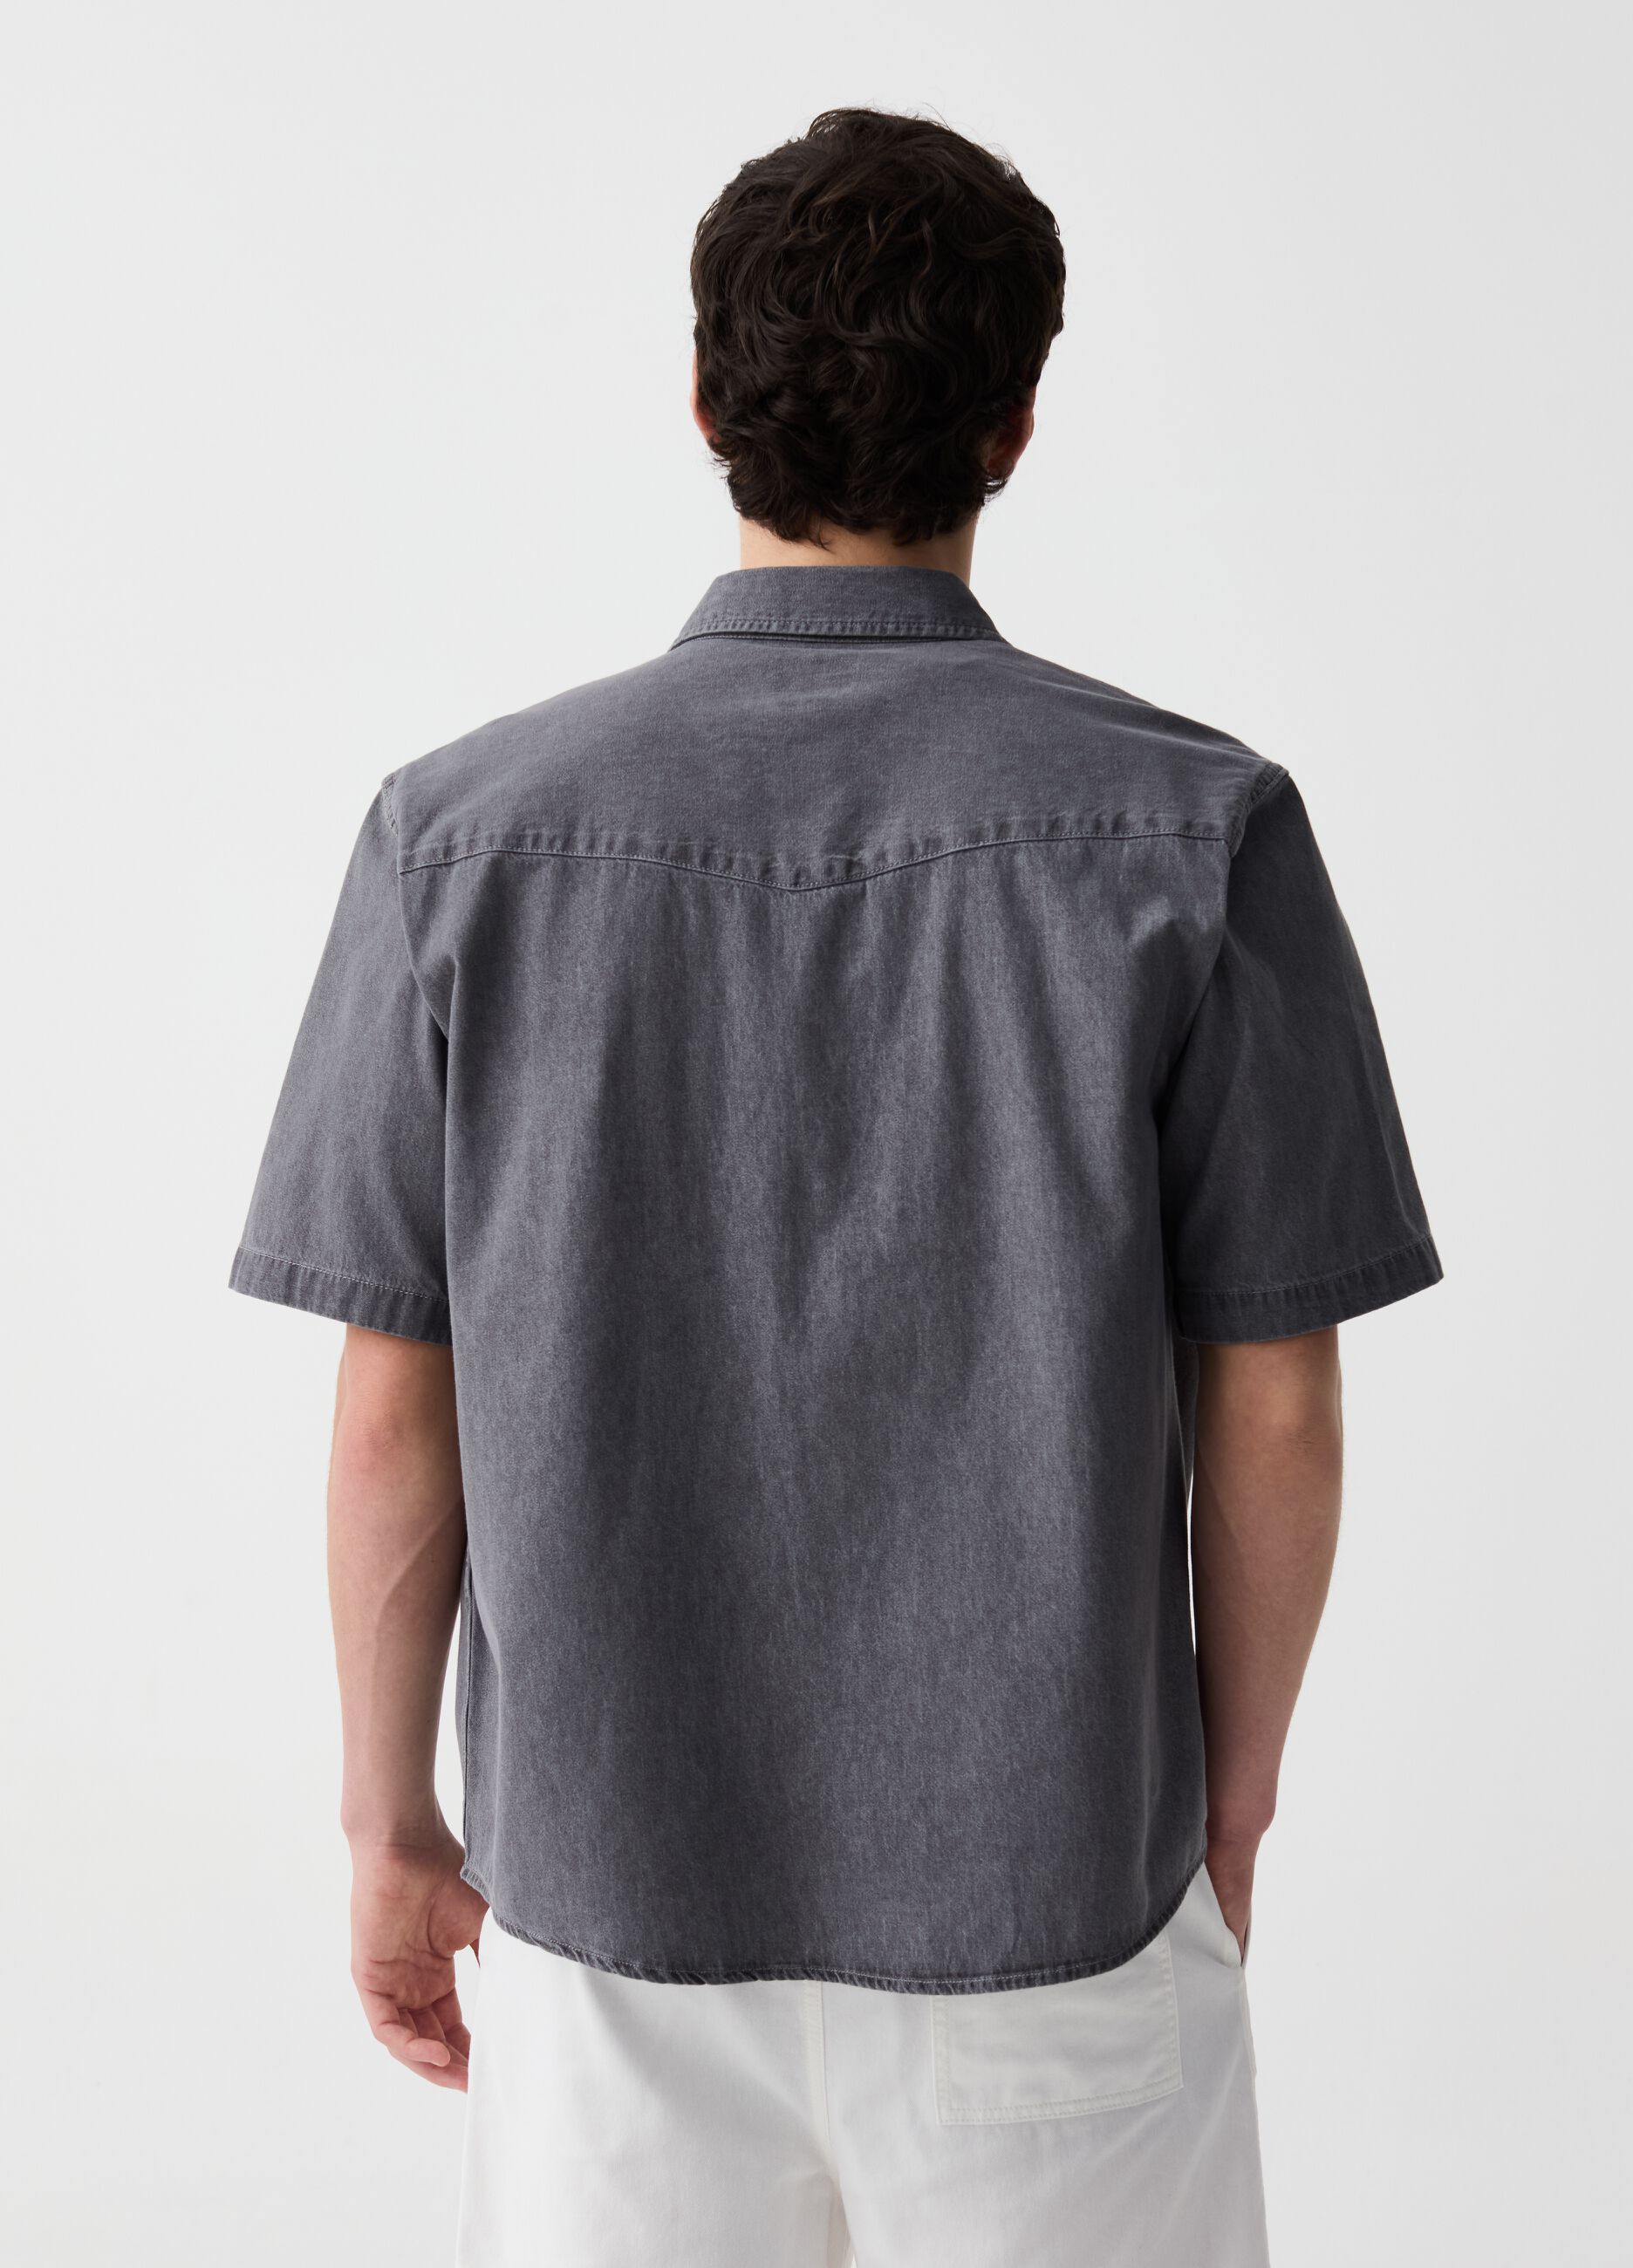 Short-sleeved shirt in denim with pockets